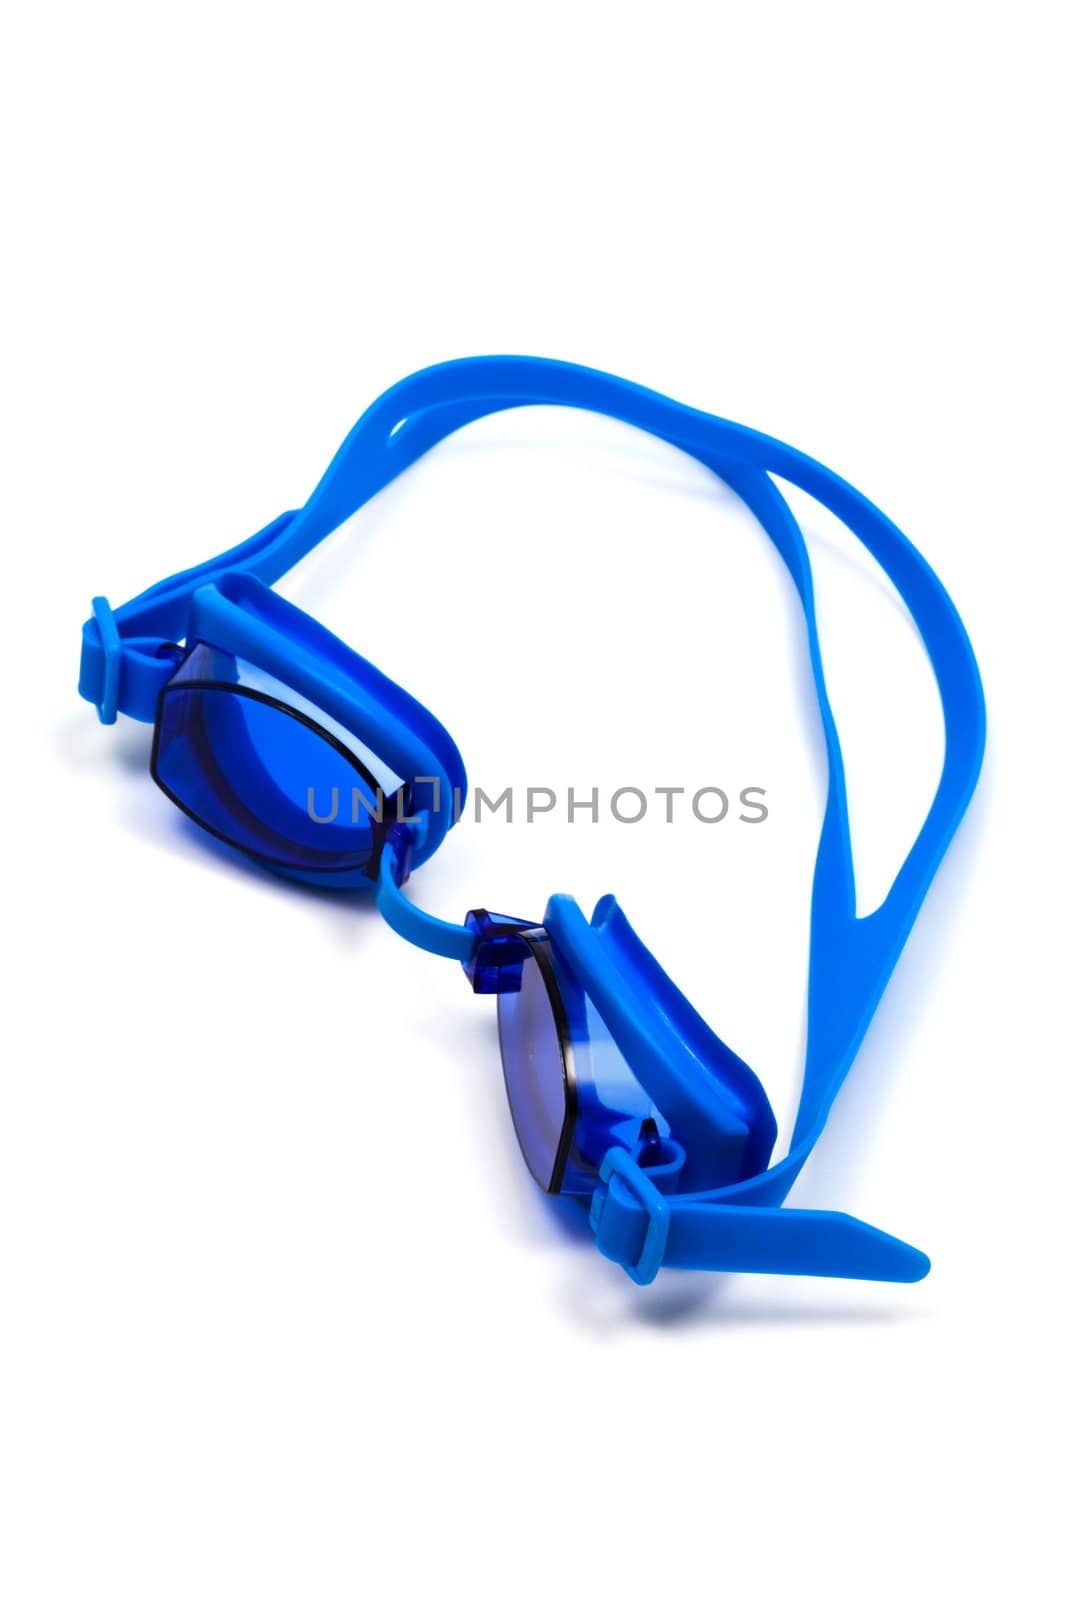 Glasses for swimming by terex